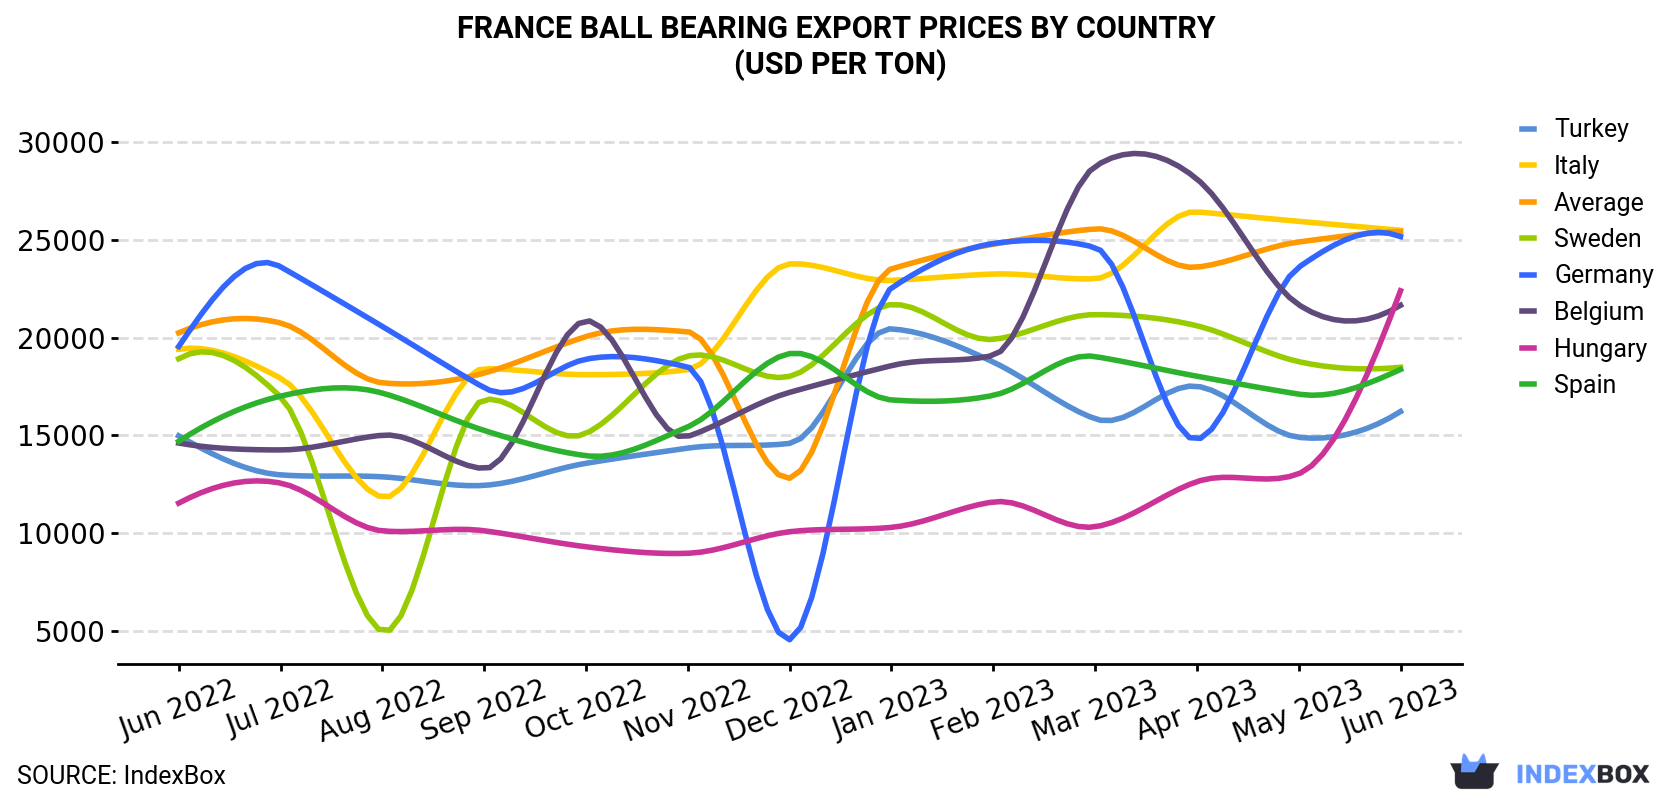 France Ball Bearing Export Prices By Country (USD Per Ton)